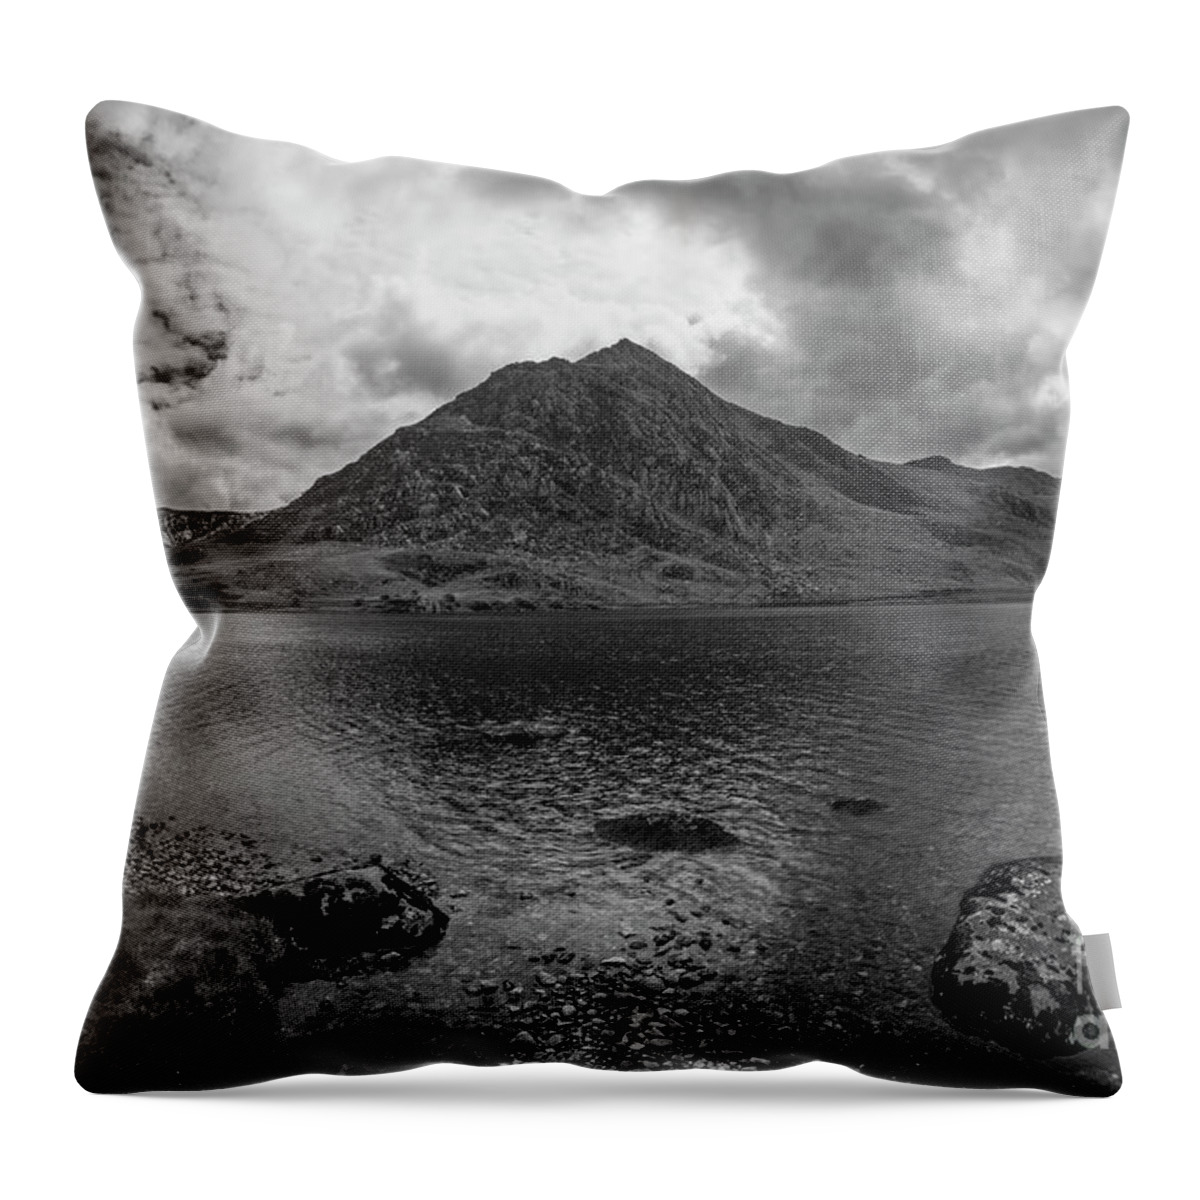 Wales Throw Pillow featuring the photograph Tryfan Mountain #2 by Ian Mitchell